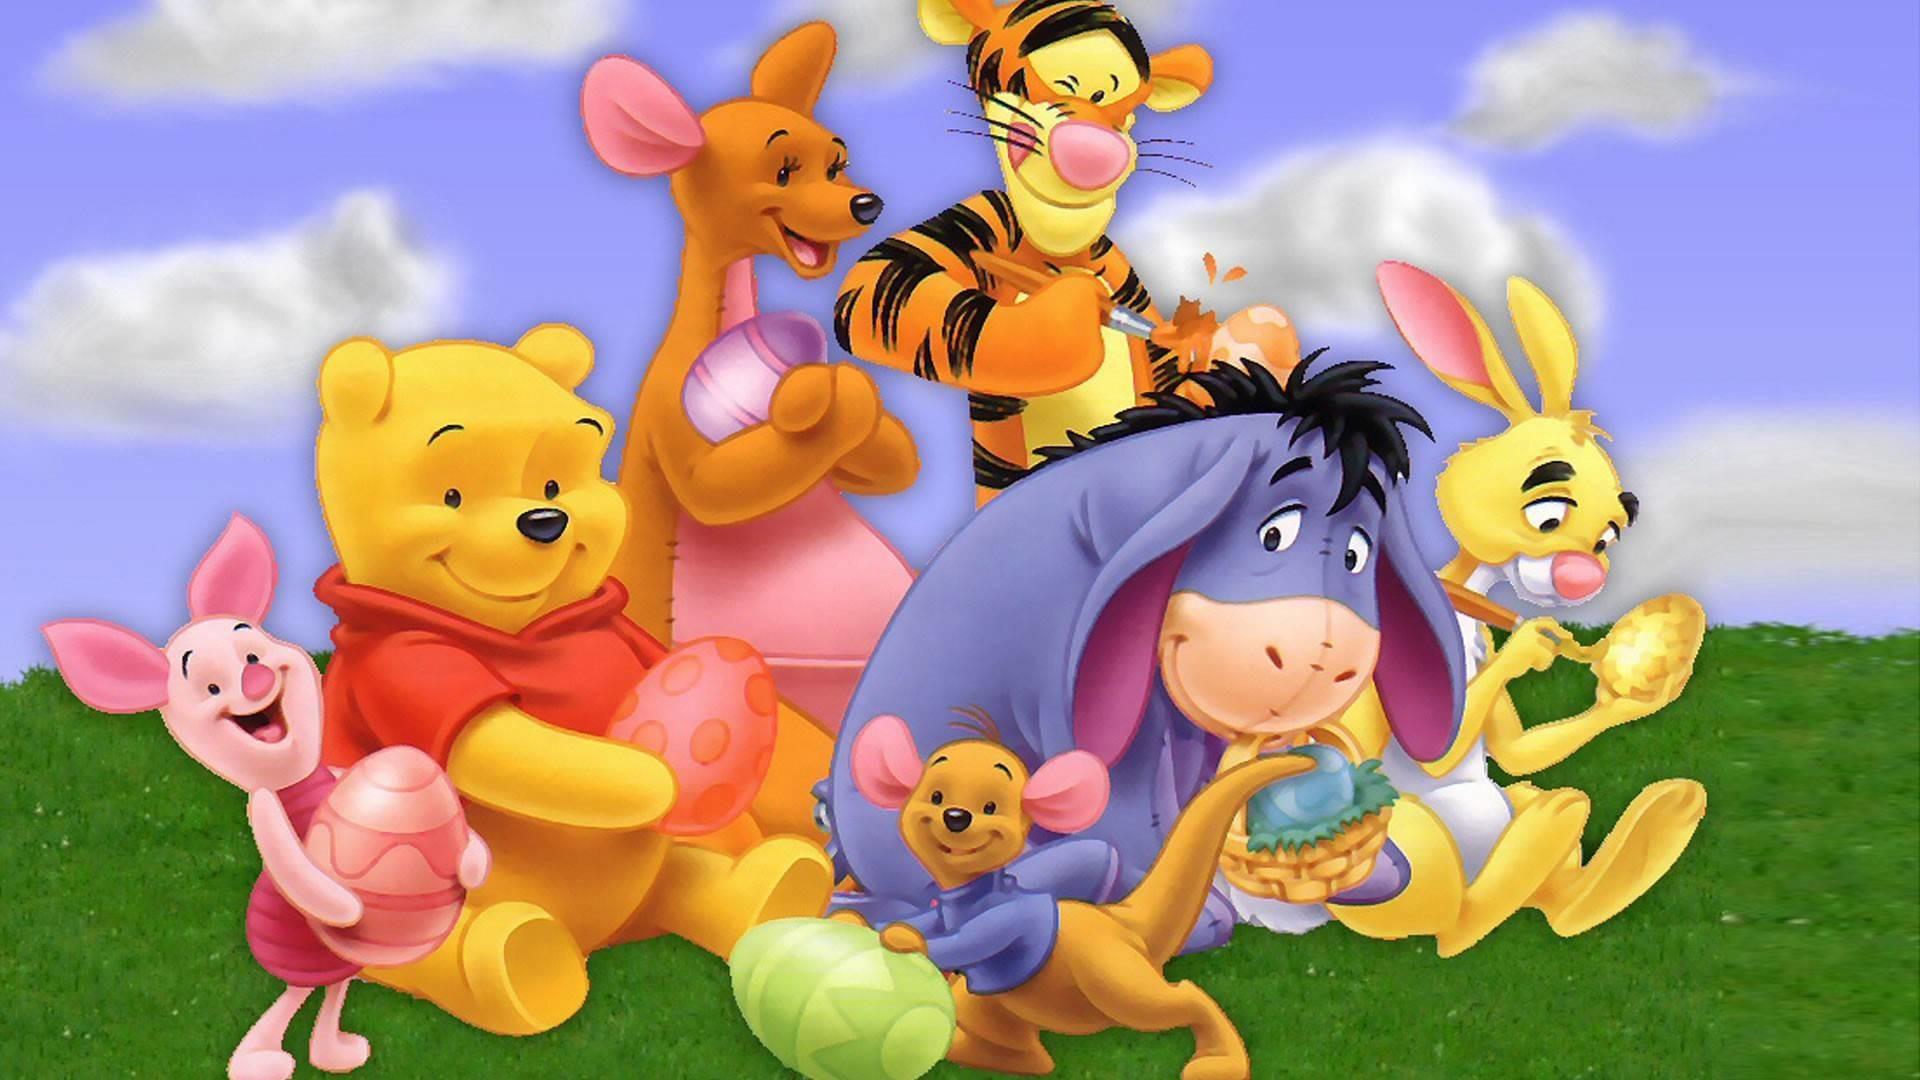 Valentine Winnie The Pooh Wallpapers - Wallpaper Cave